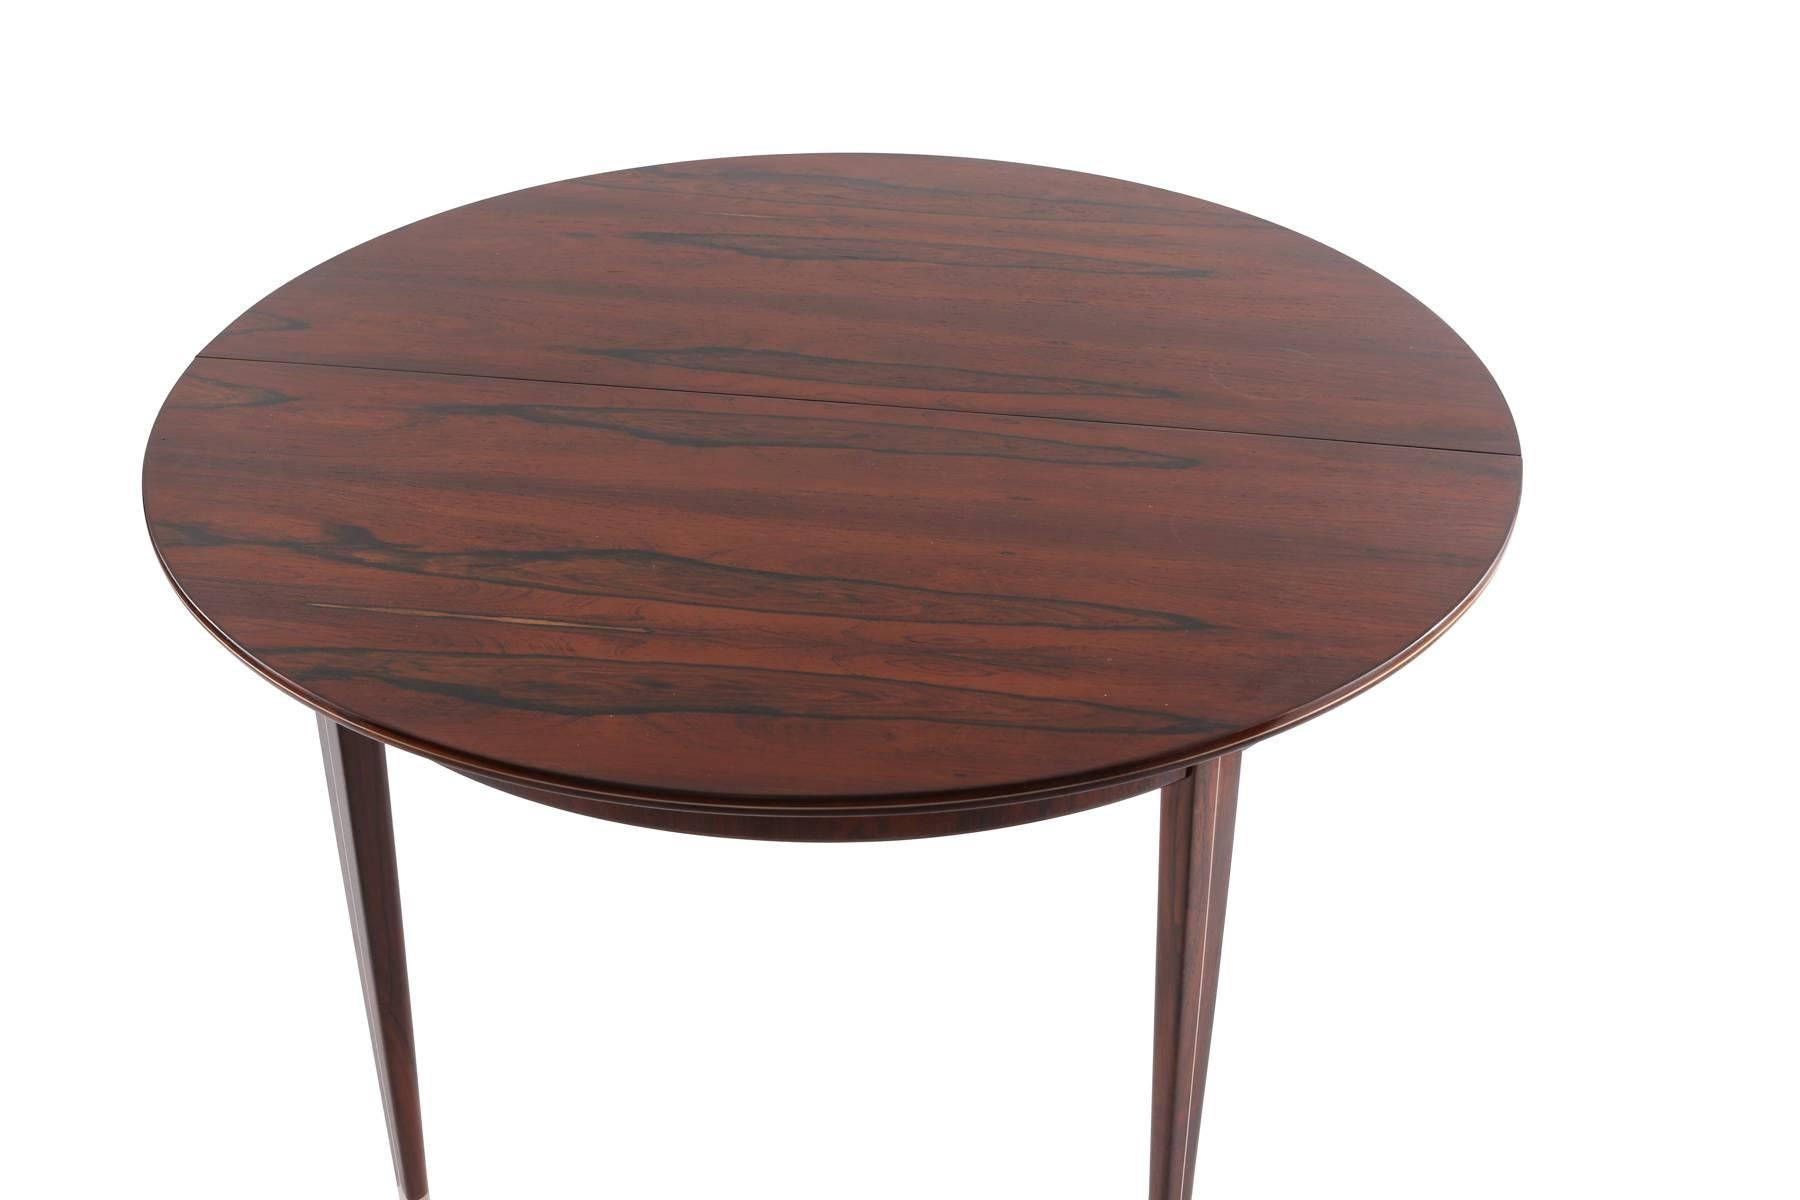 Rare rosewood and pewter dining table by Georg Kofoed, circa late 1930s. This incredible example has a beautifully grained rosewood top and extends from 49